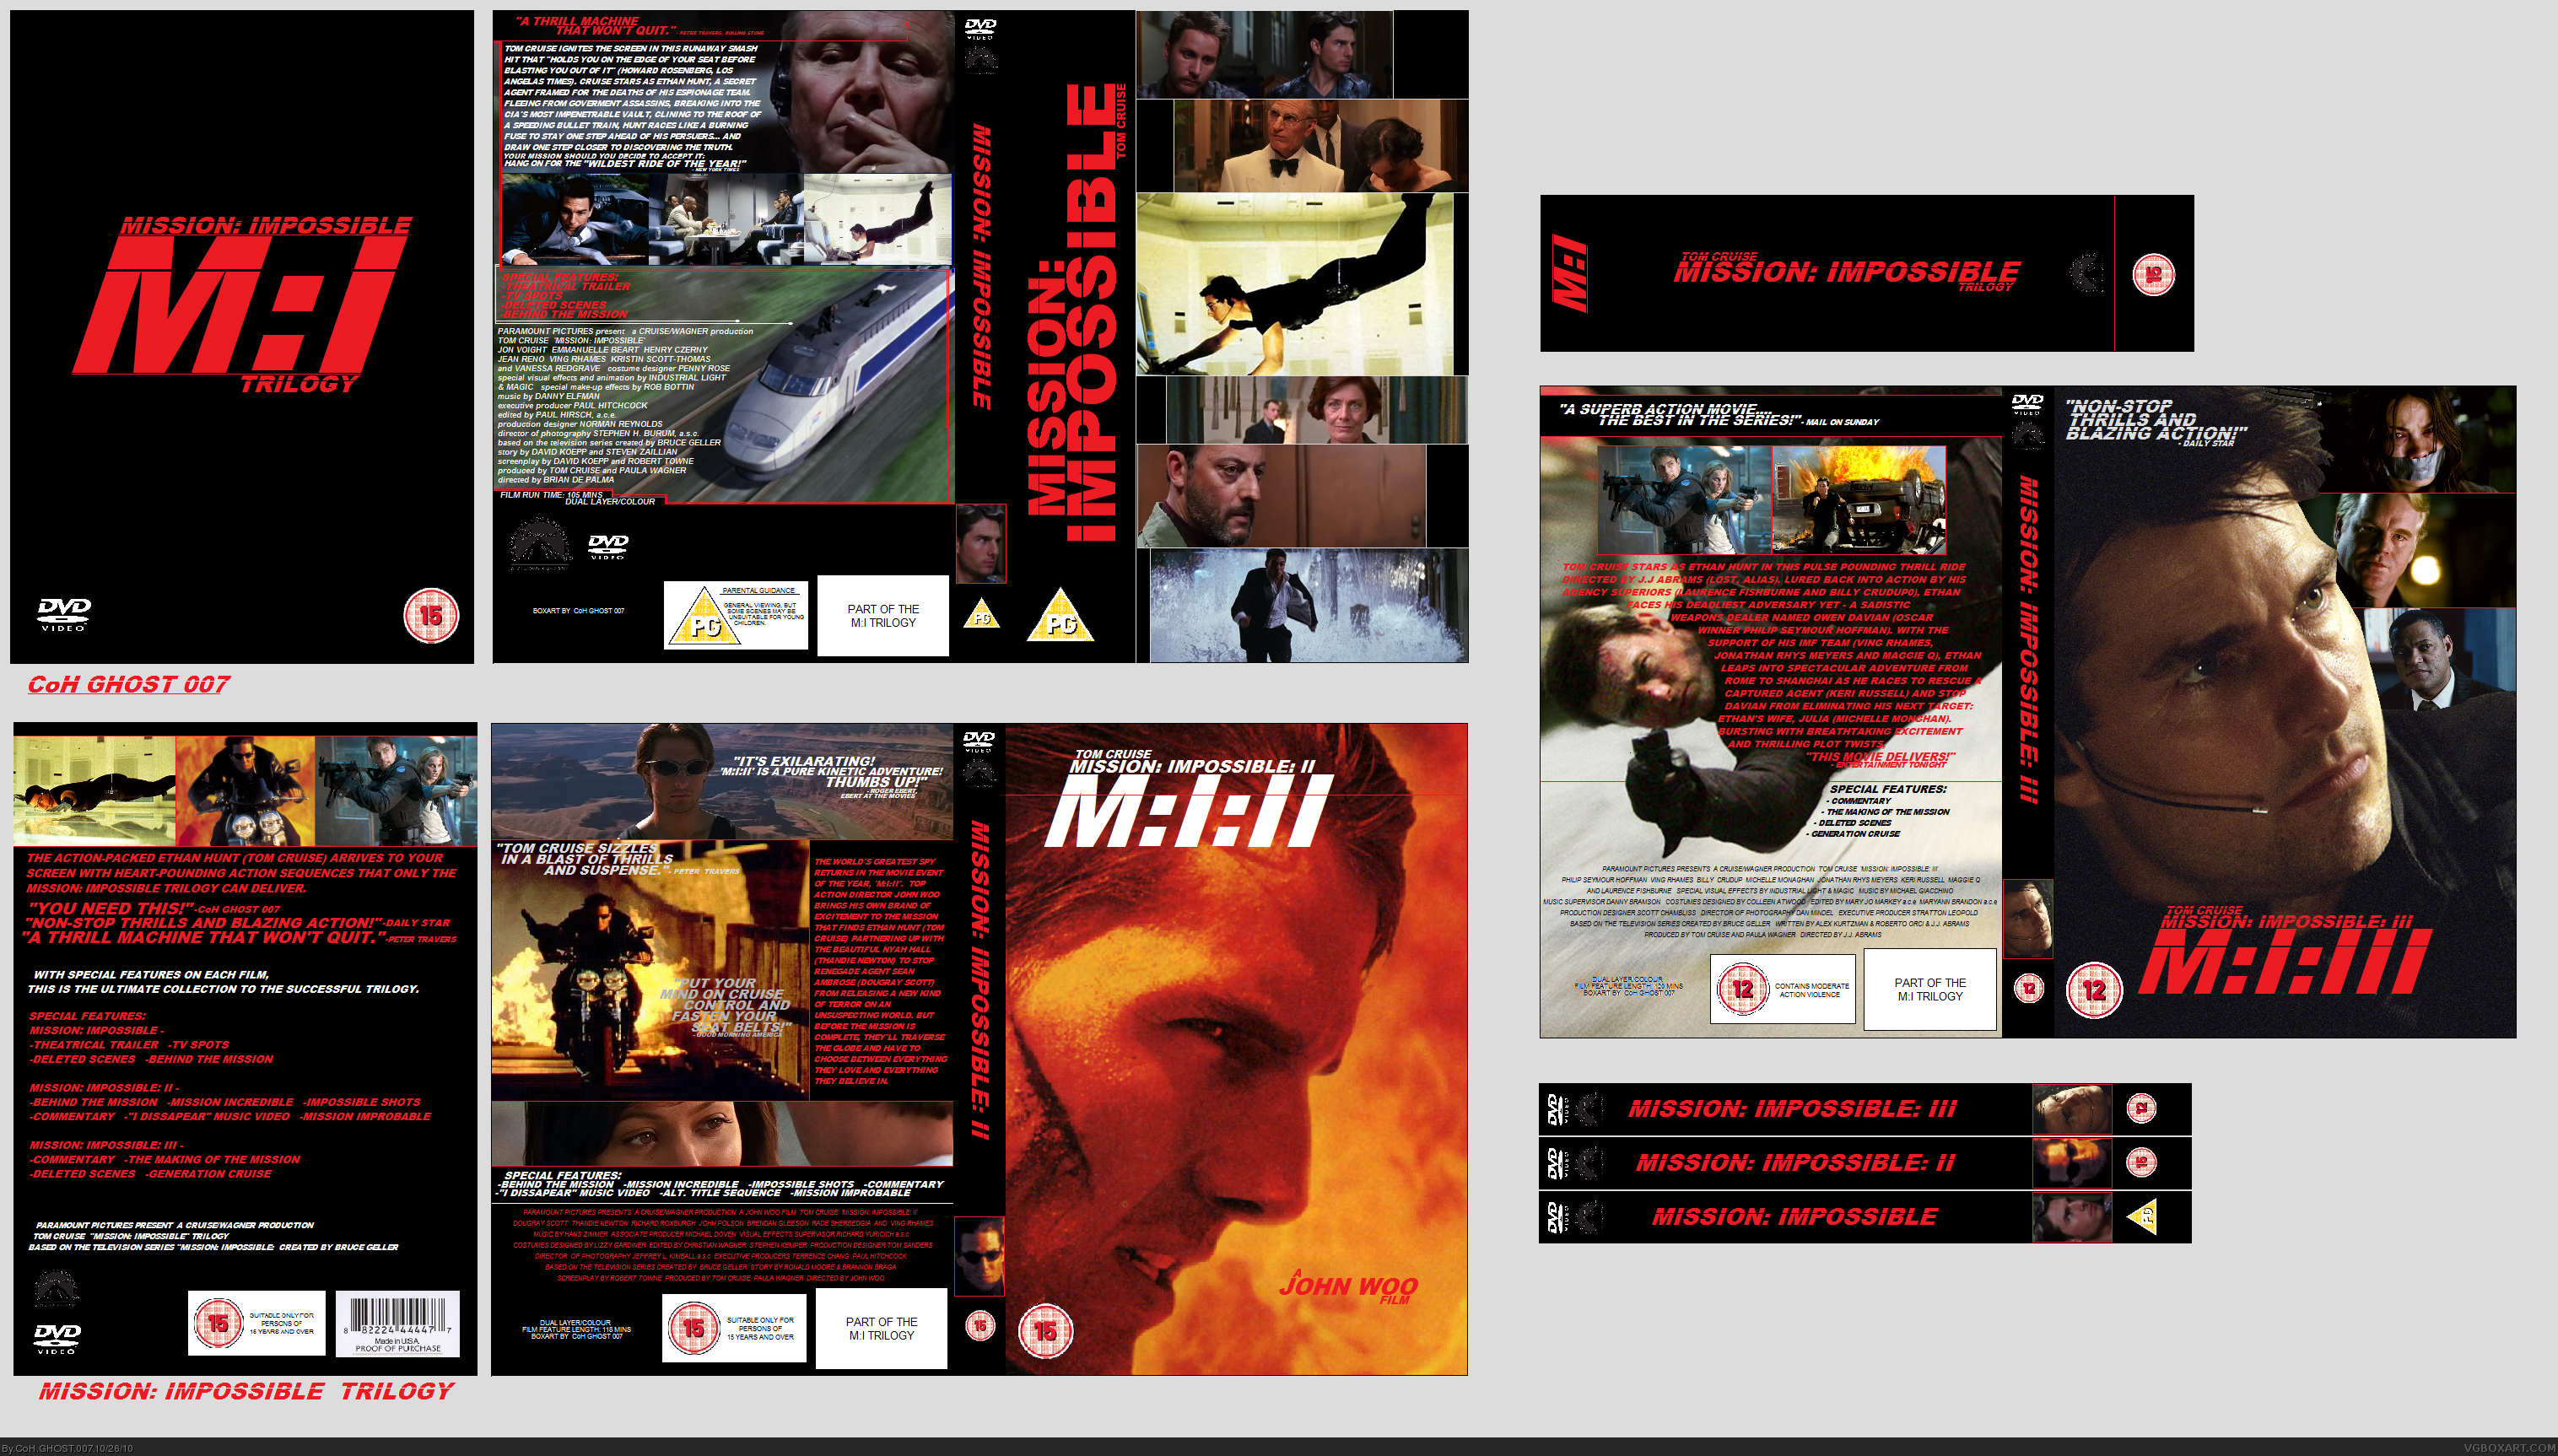 Mission: Impossible Trilogy box cover